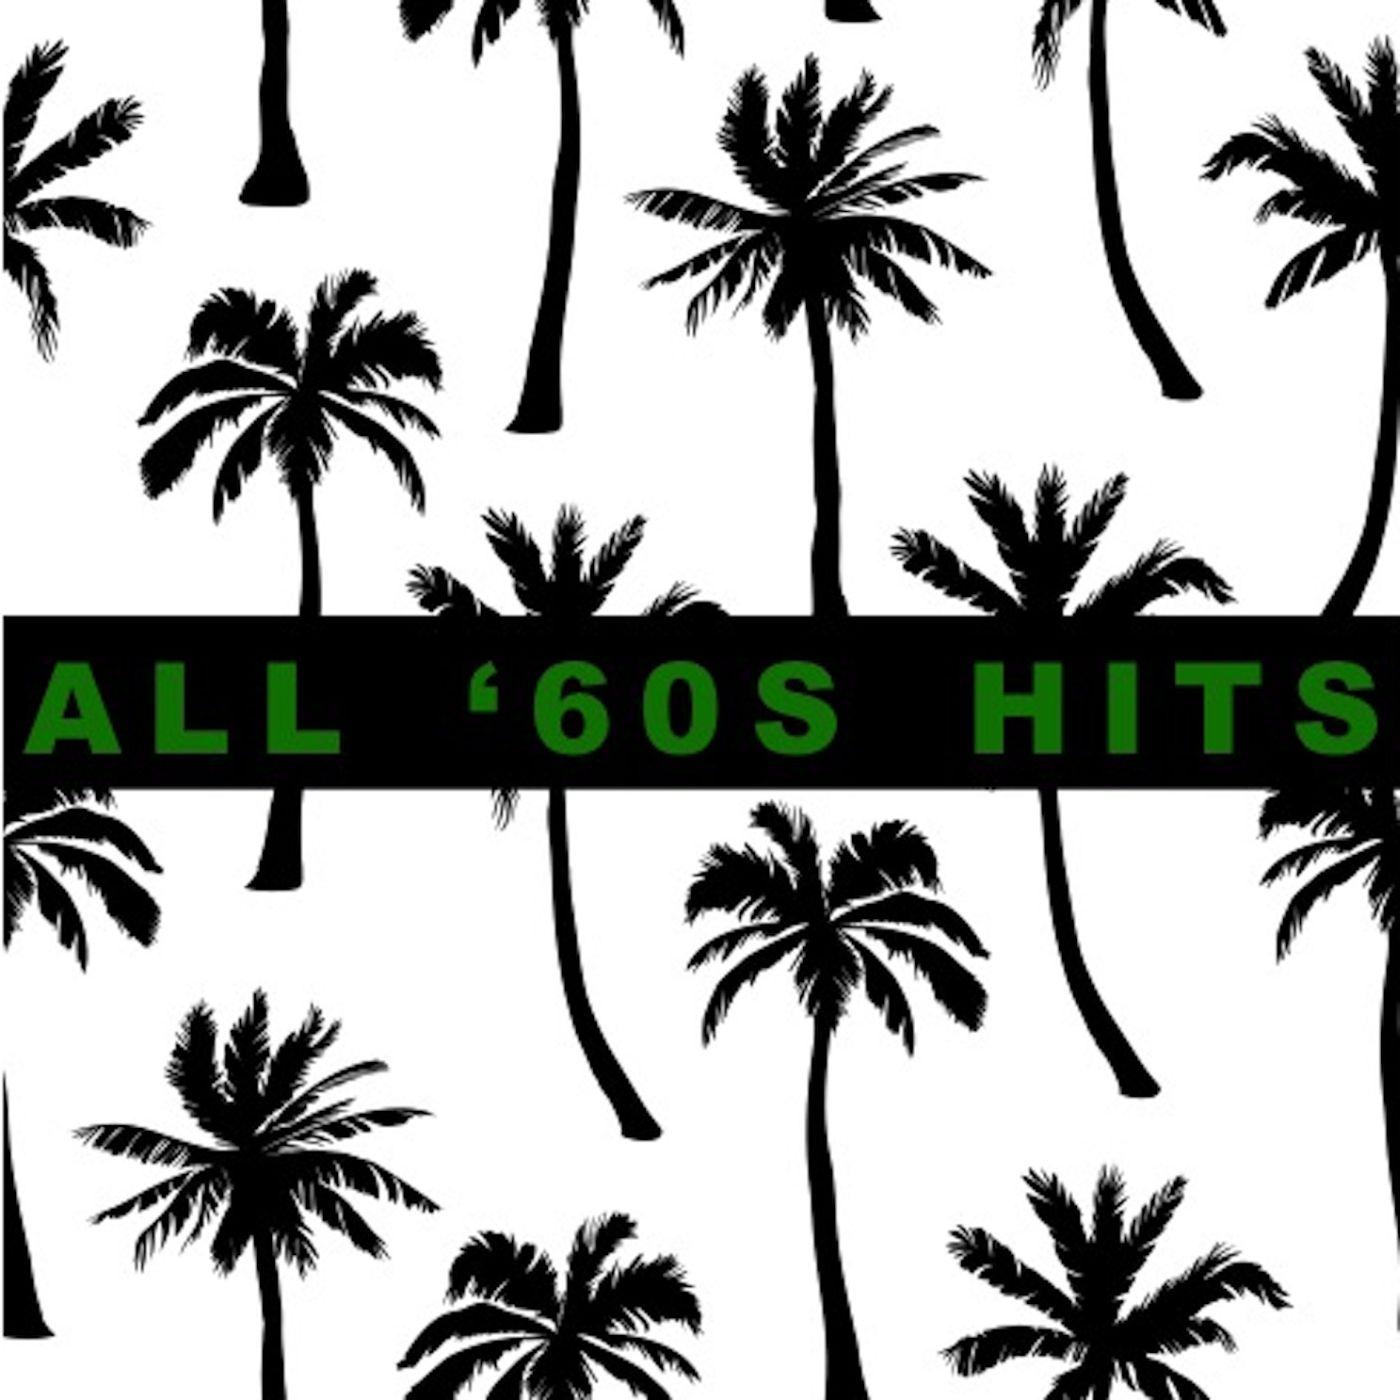 All '60s Hits